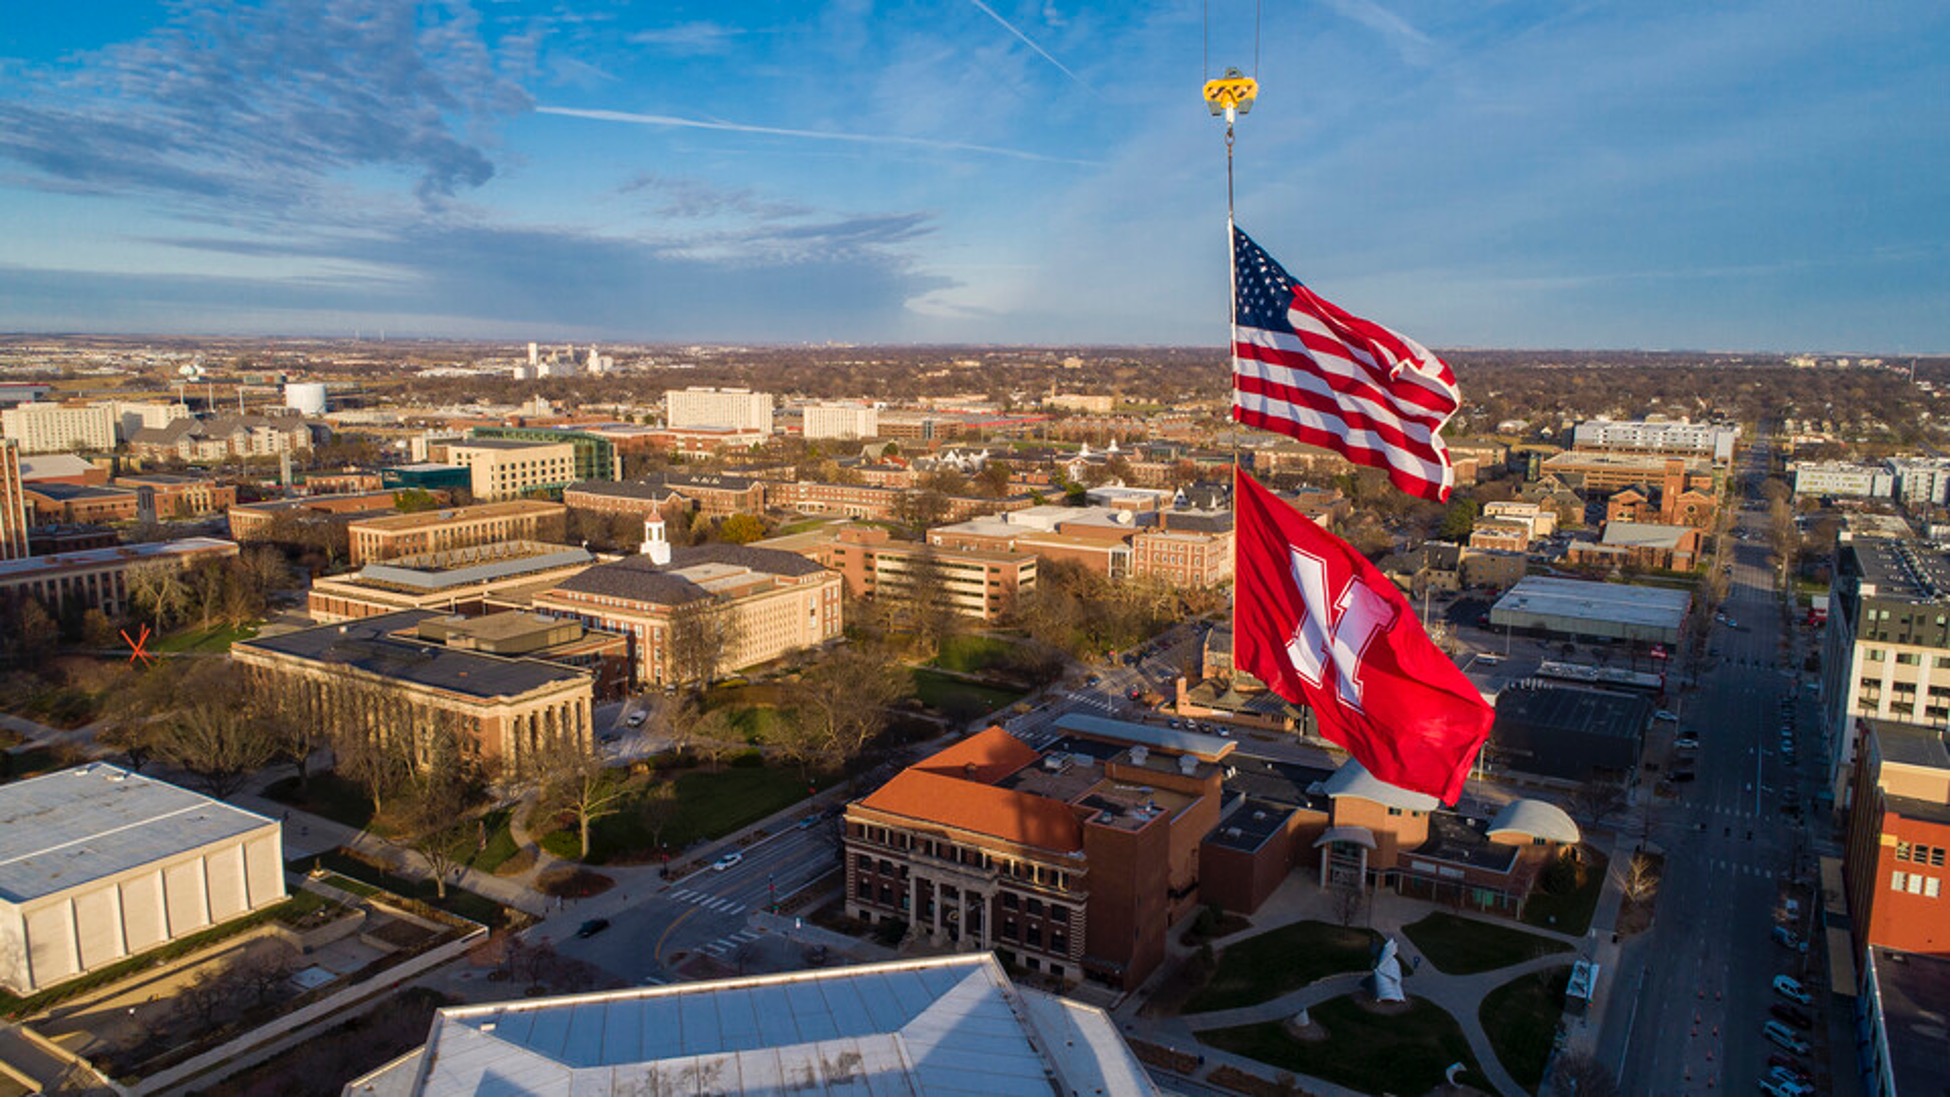 The United States and Husker flags fly from a Hausmann Construction crane in downtown Lincoln on a sunny Friday afternoon.